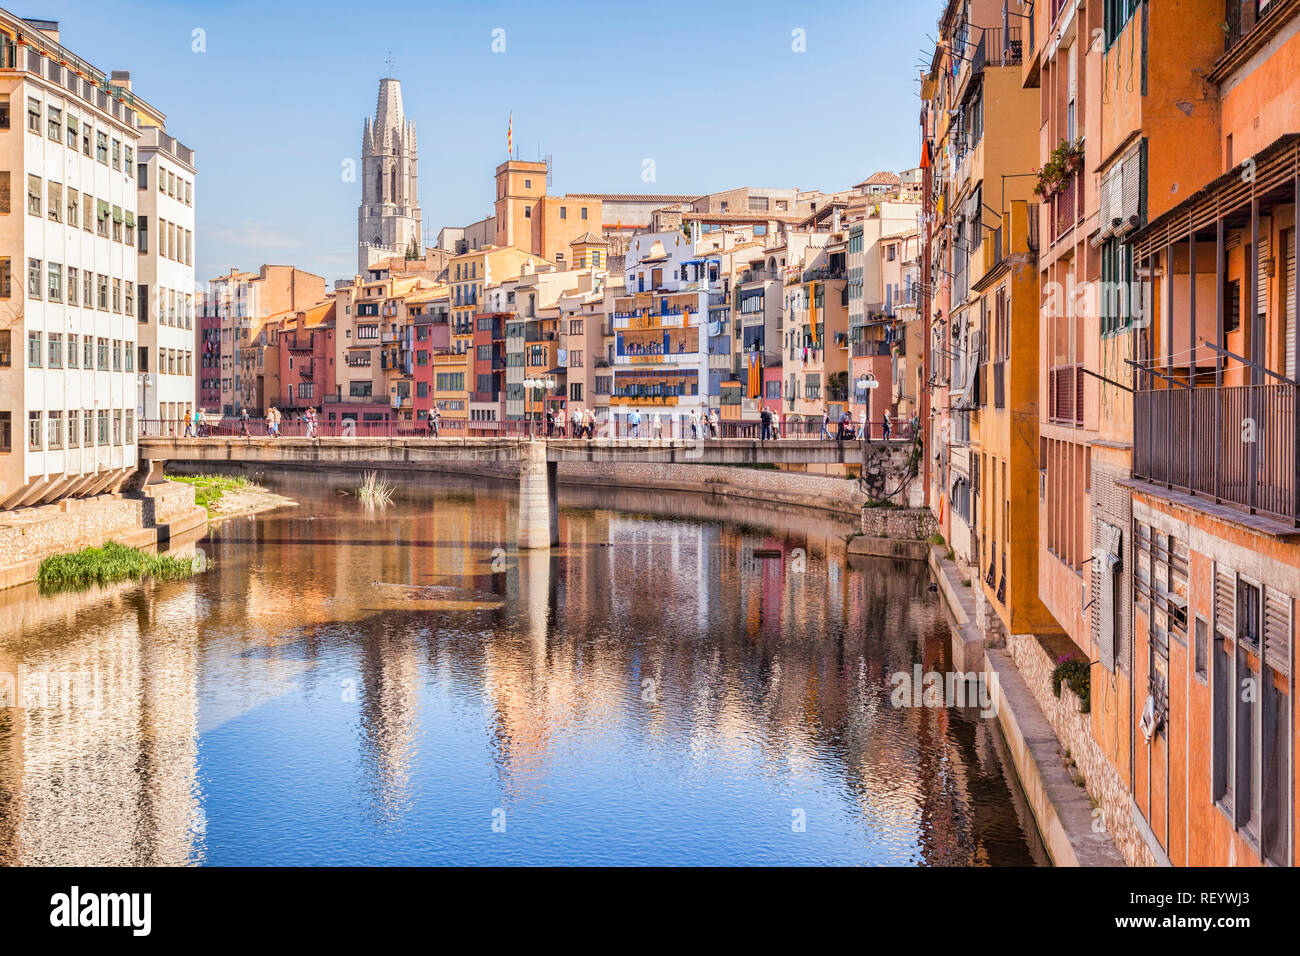 Medieval houses on the banks of the River Onyar, and the Pont de Sant Agusti, and the bell tower of Sant Feliu Collegiate Church, Girona, Catalonia, S Stock Photo